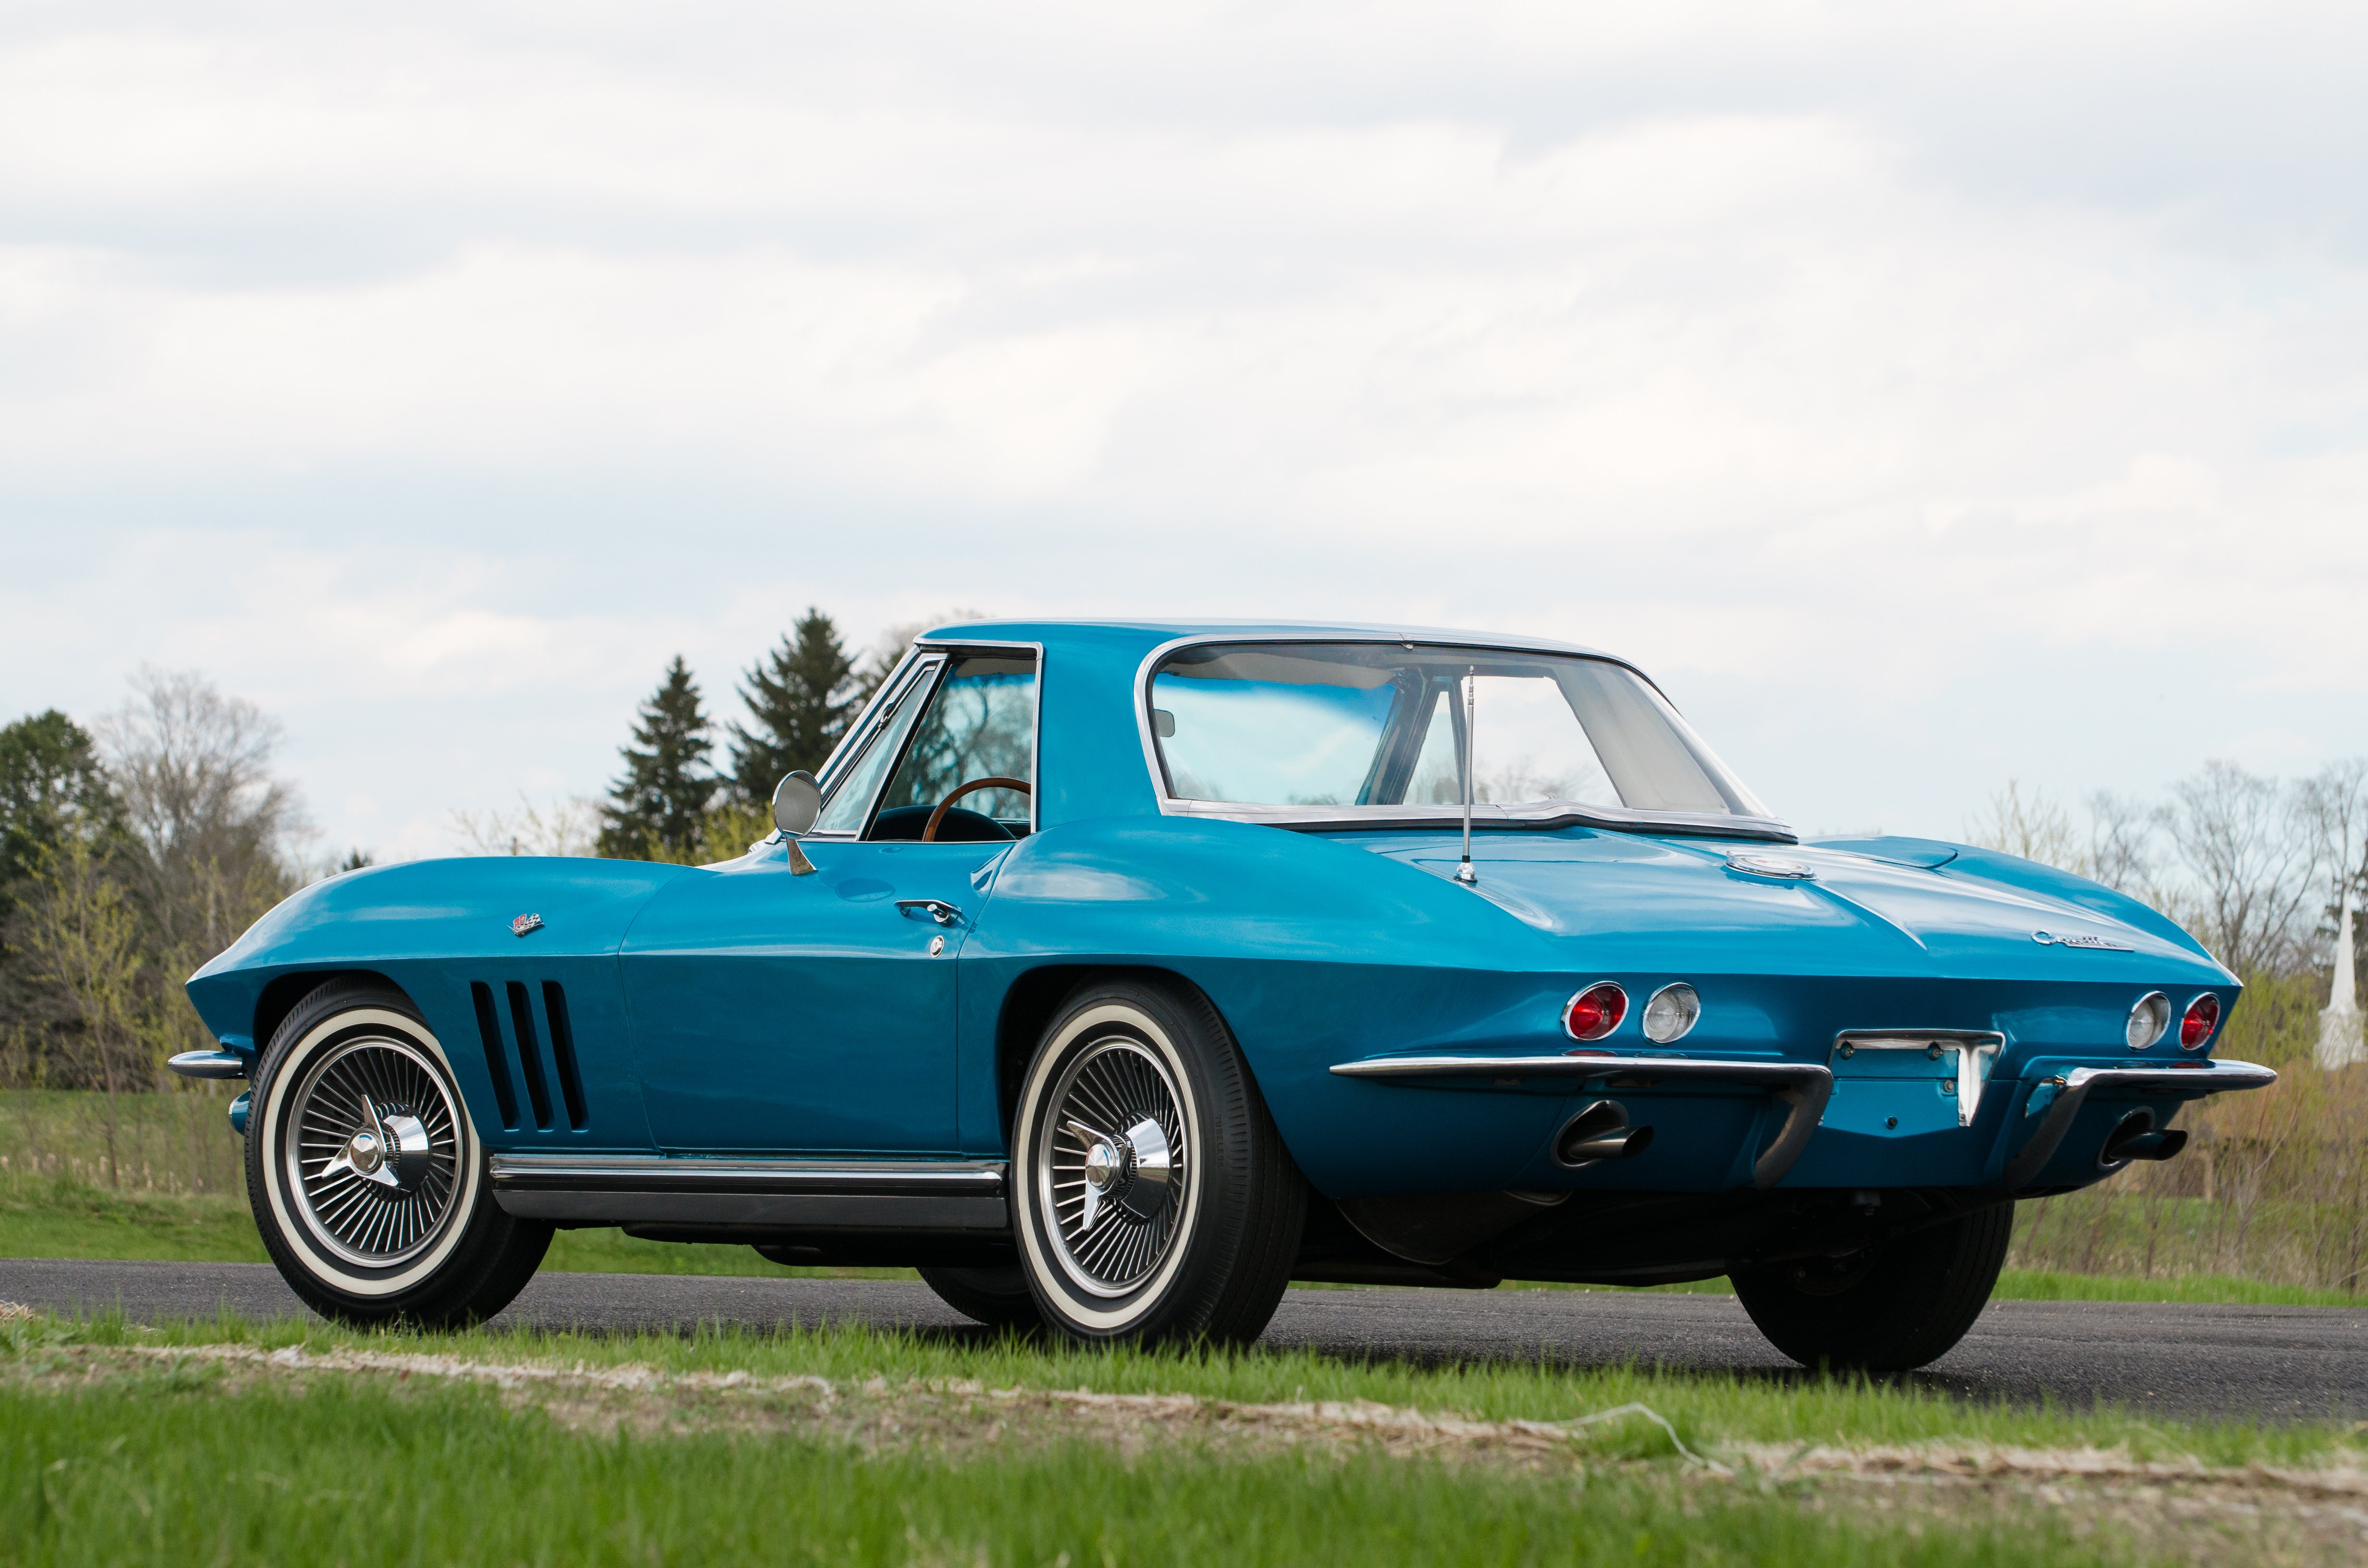 1965, Chevrolet, Corvette, Convertible, Stingray, Muscle, Classic, Old